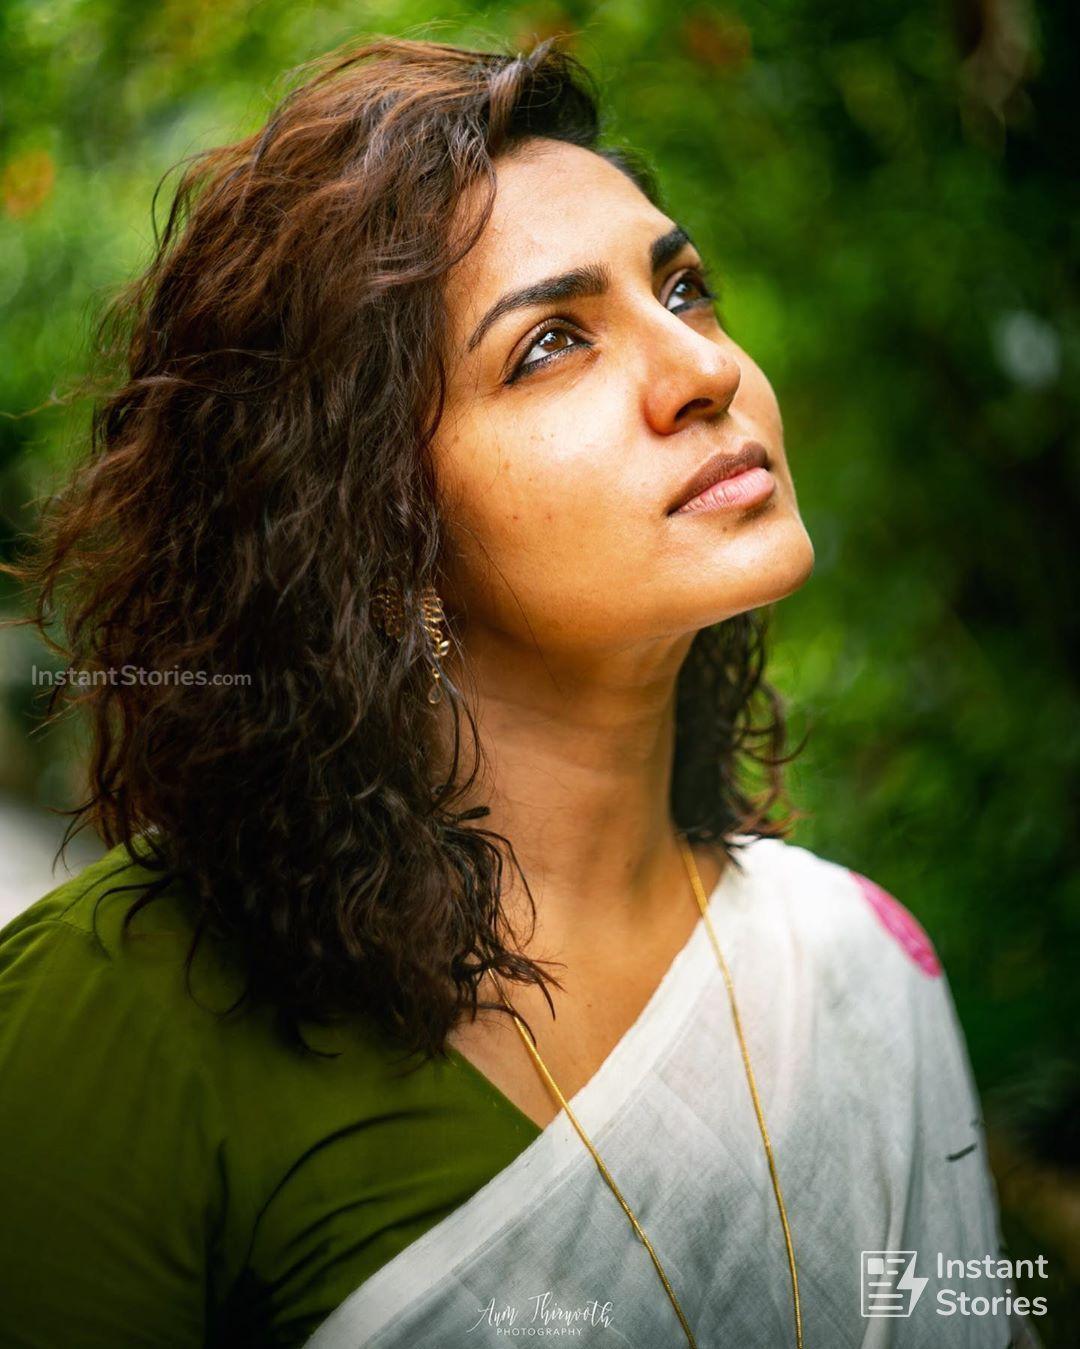 Actress Parvathy gets a new makeover, rocks the side buzz cut